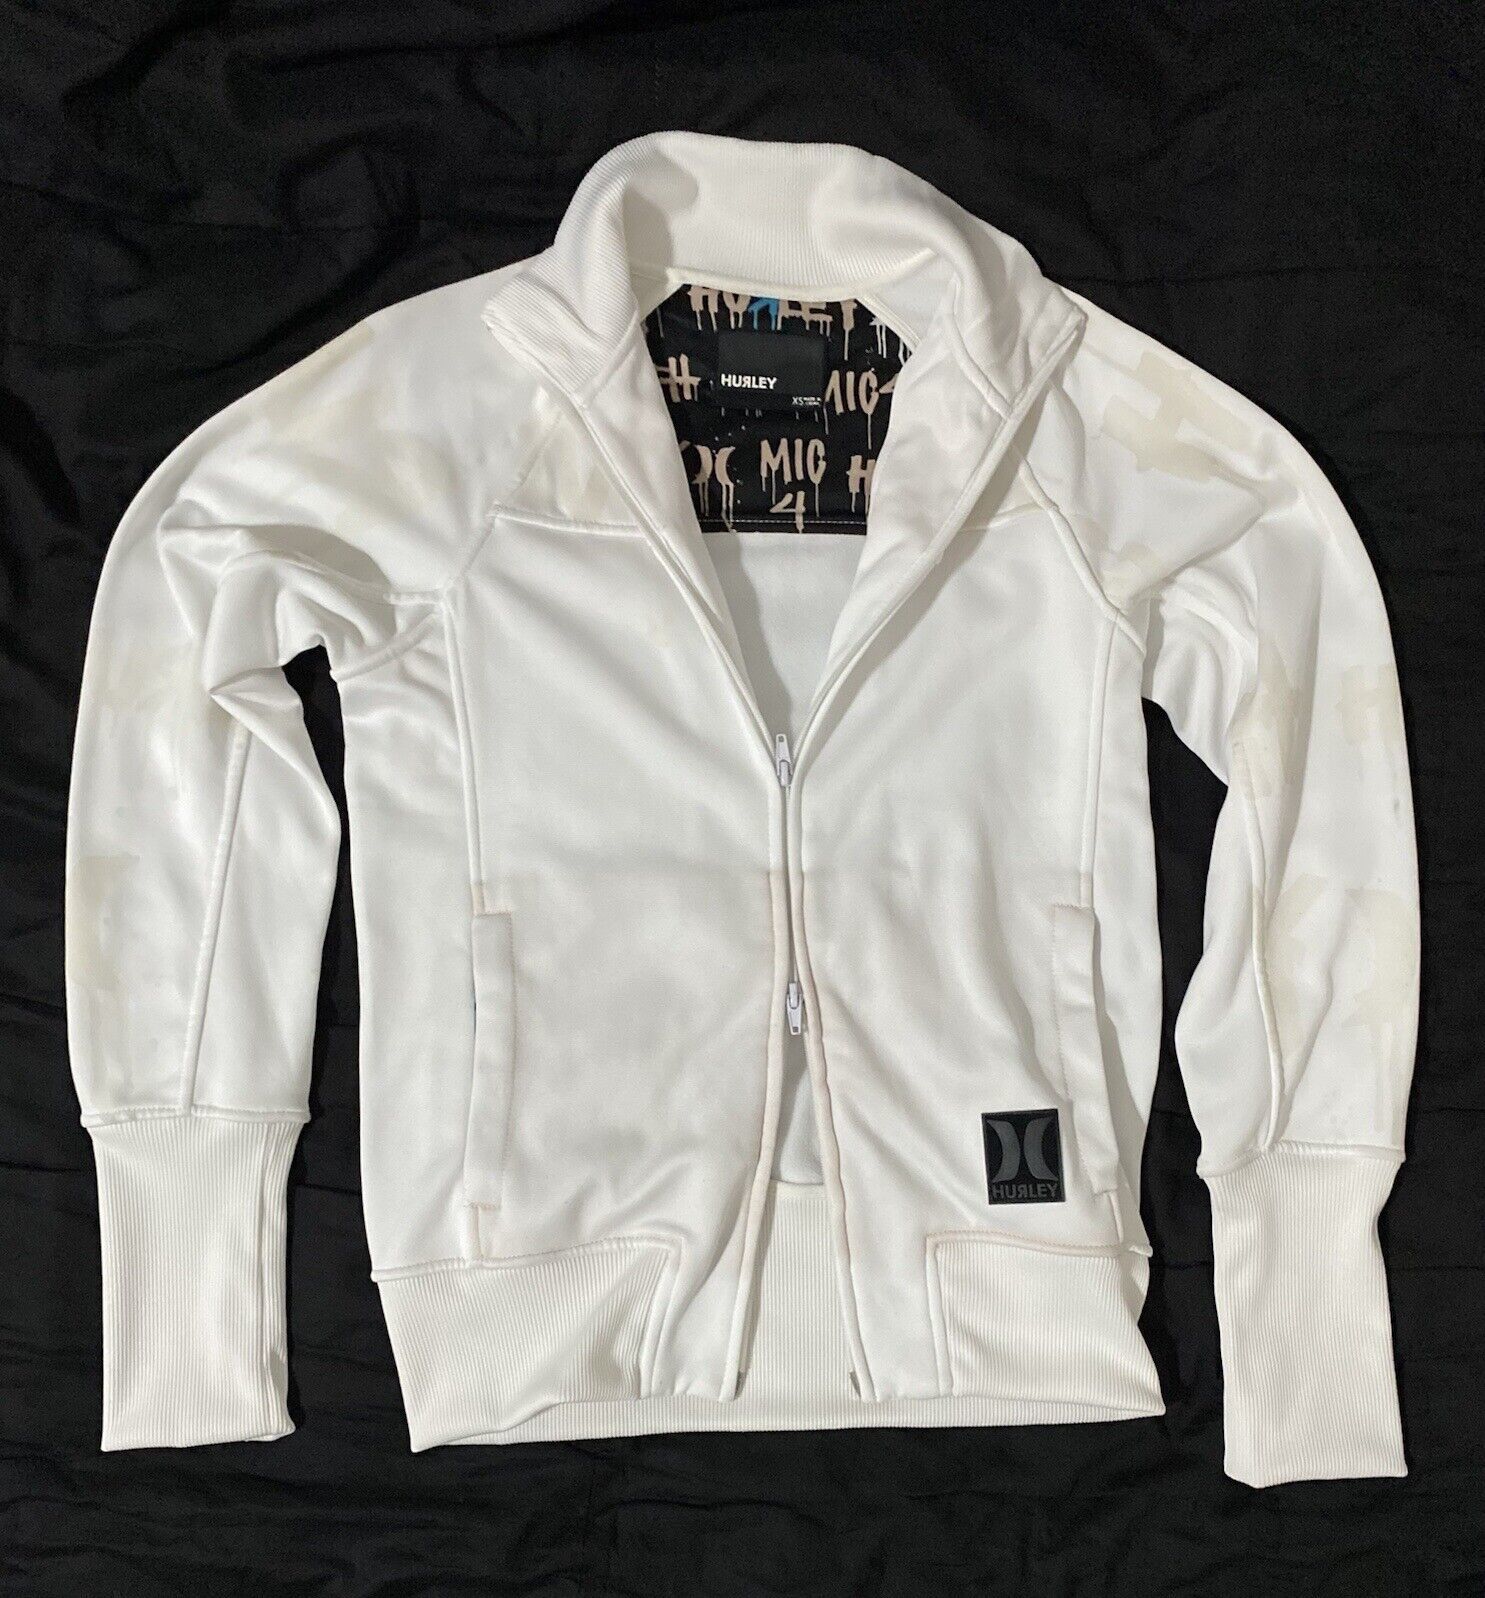 Primary image for Hurley Women's White w Graffiti Lining Jacket XS